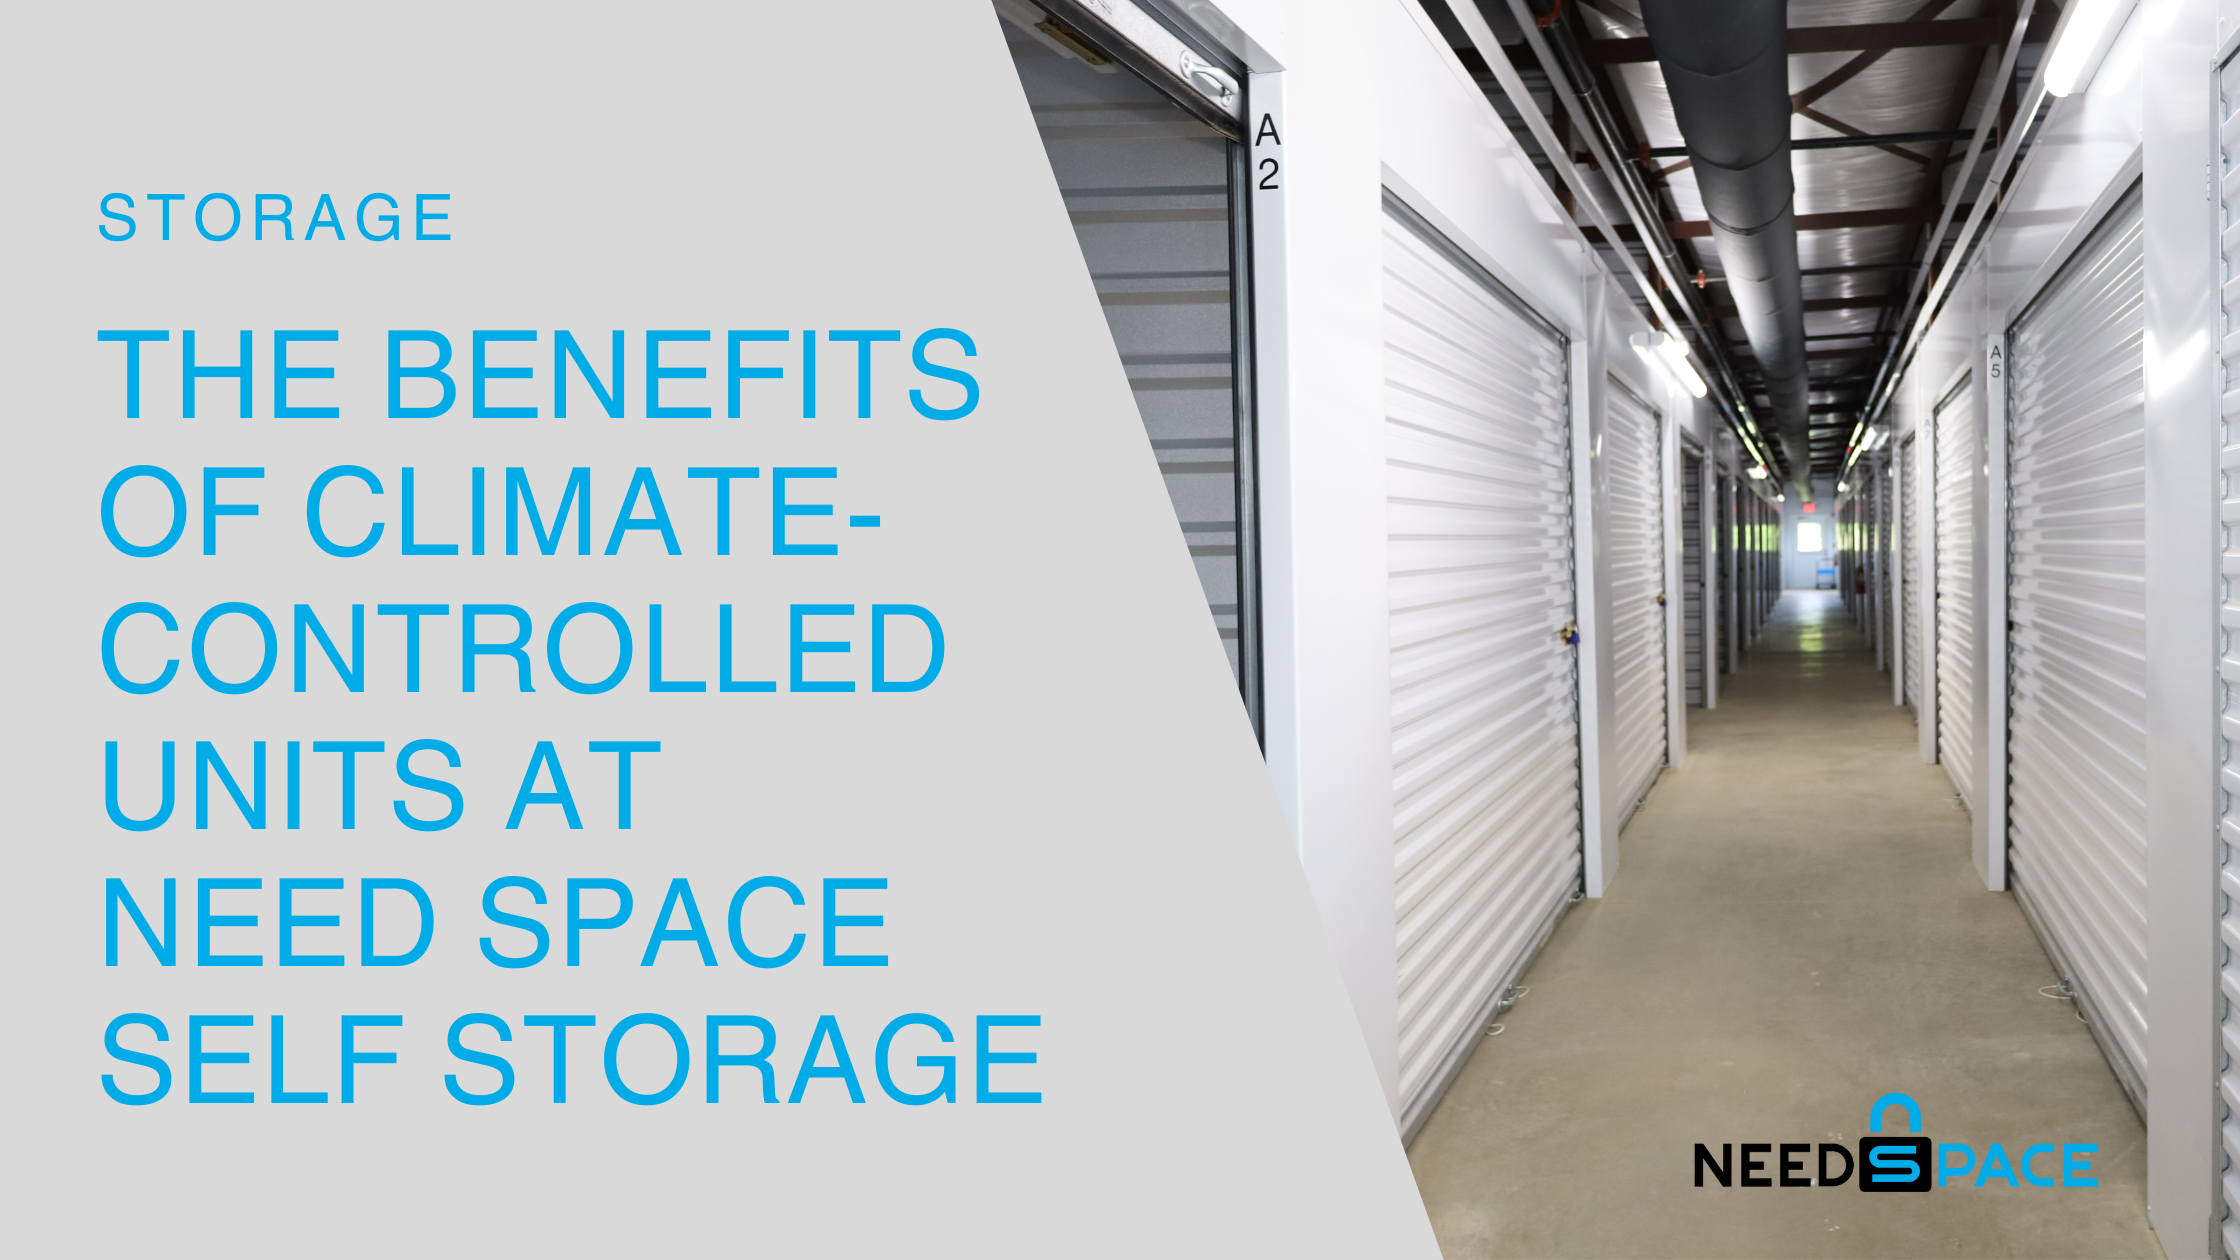 The Benefits of Climate-Controlled Units at Need Space Self Storage